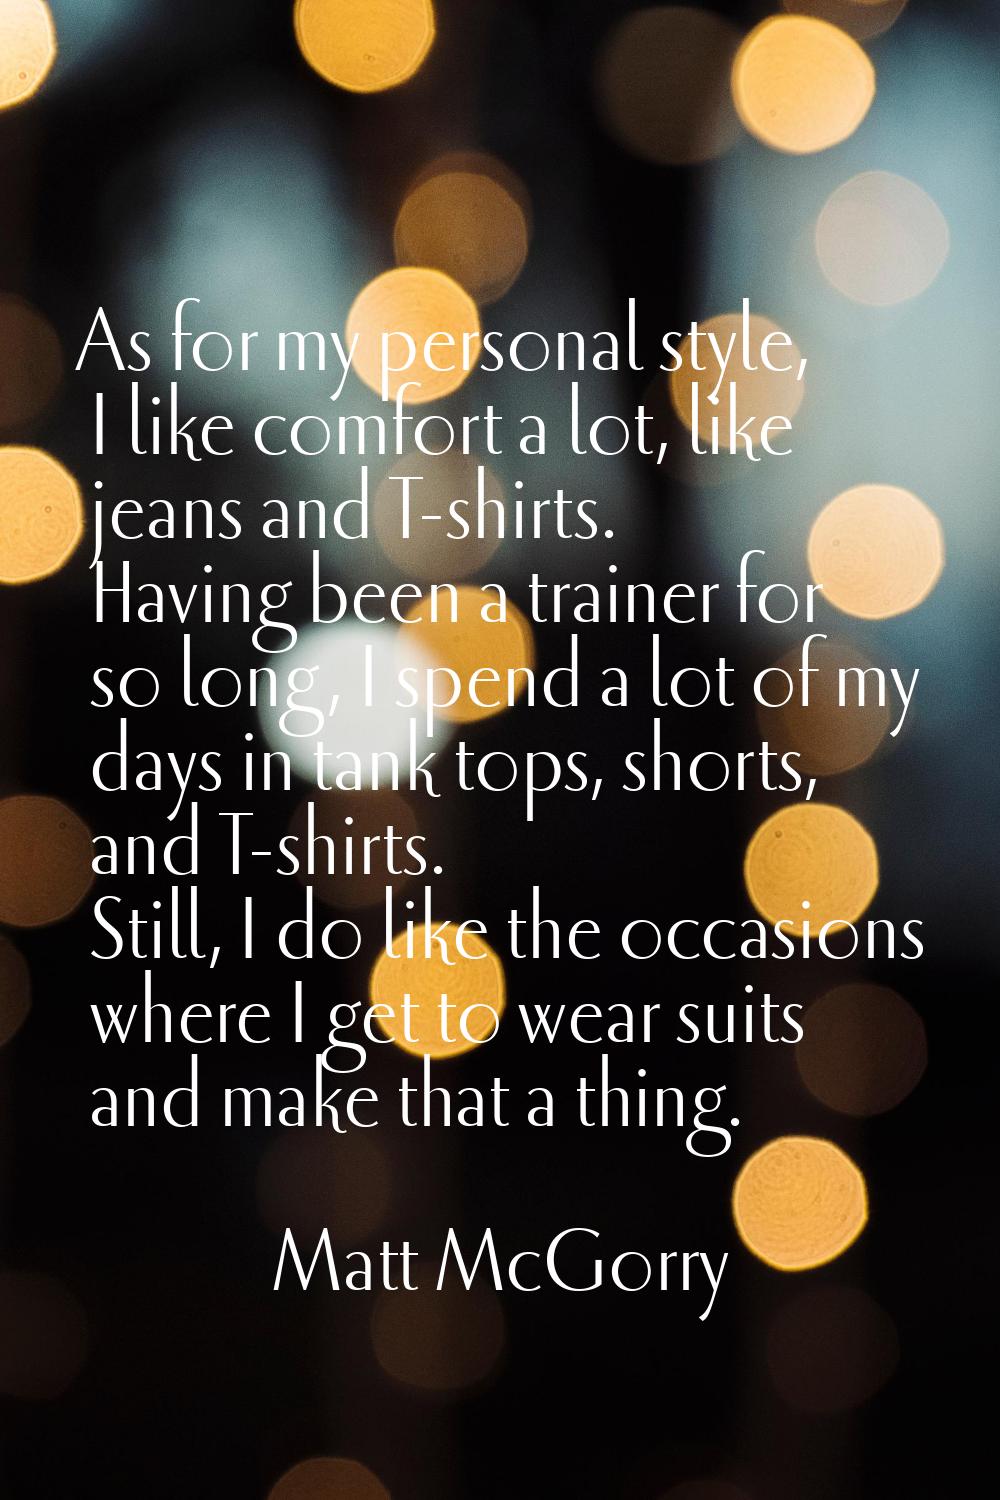 As for my personal style, I like comfort a lot, like jeans and T-shirts. Having been a trainer for 